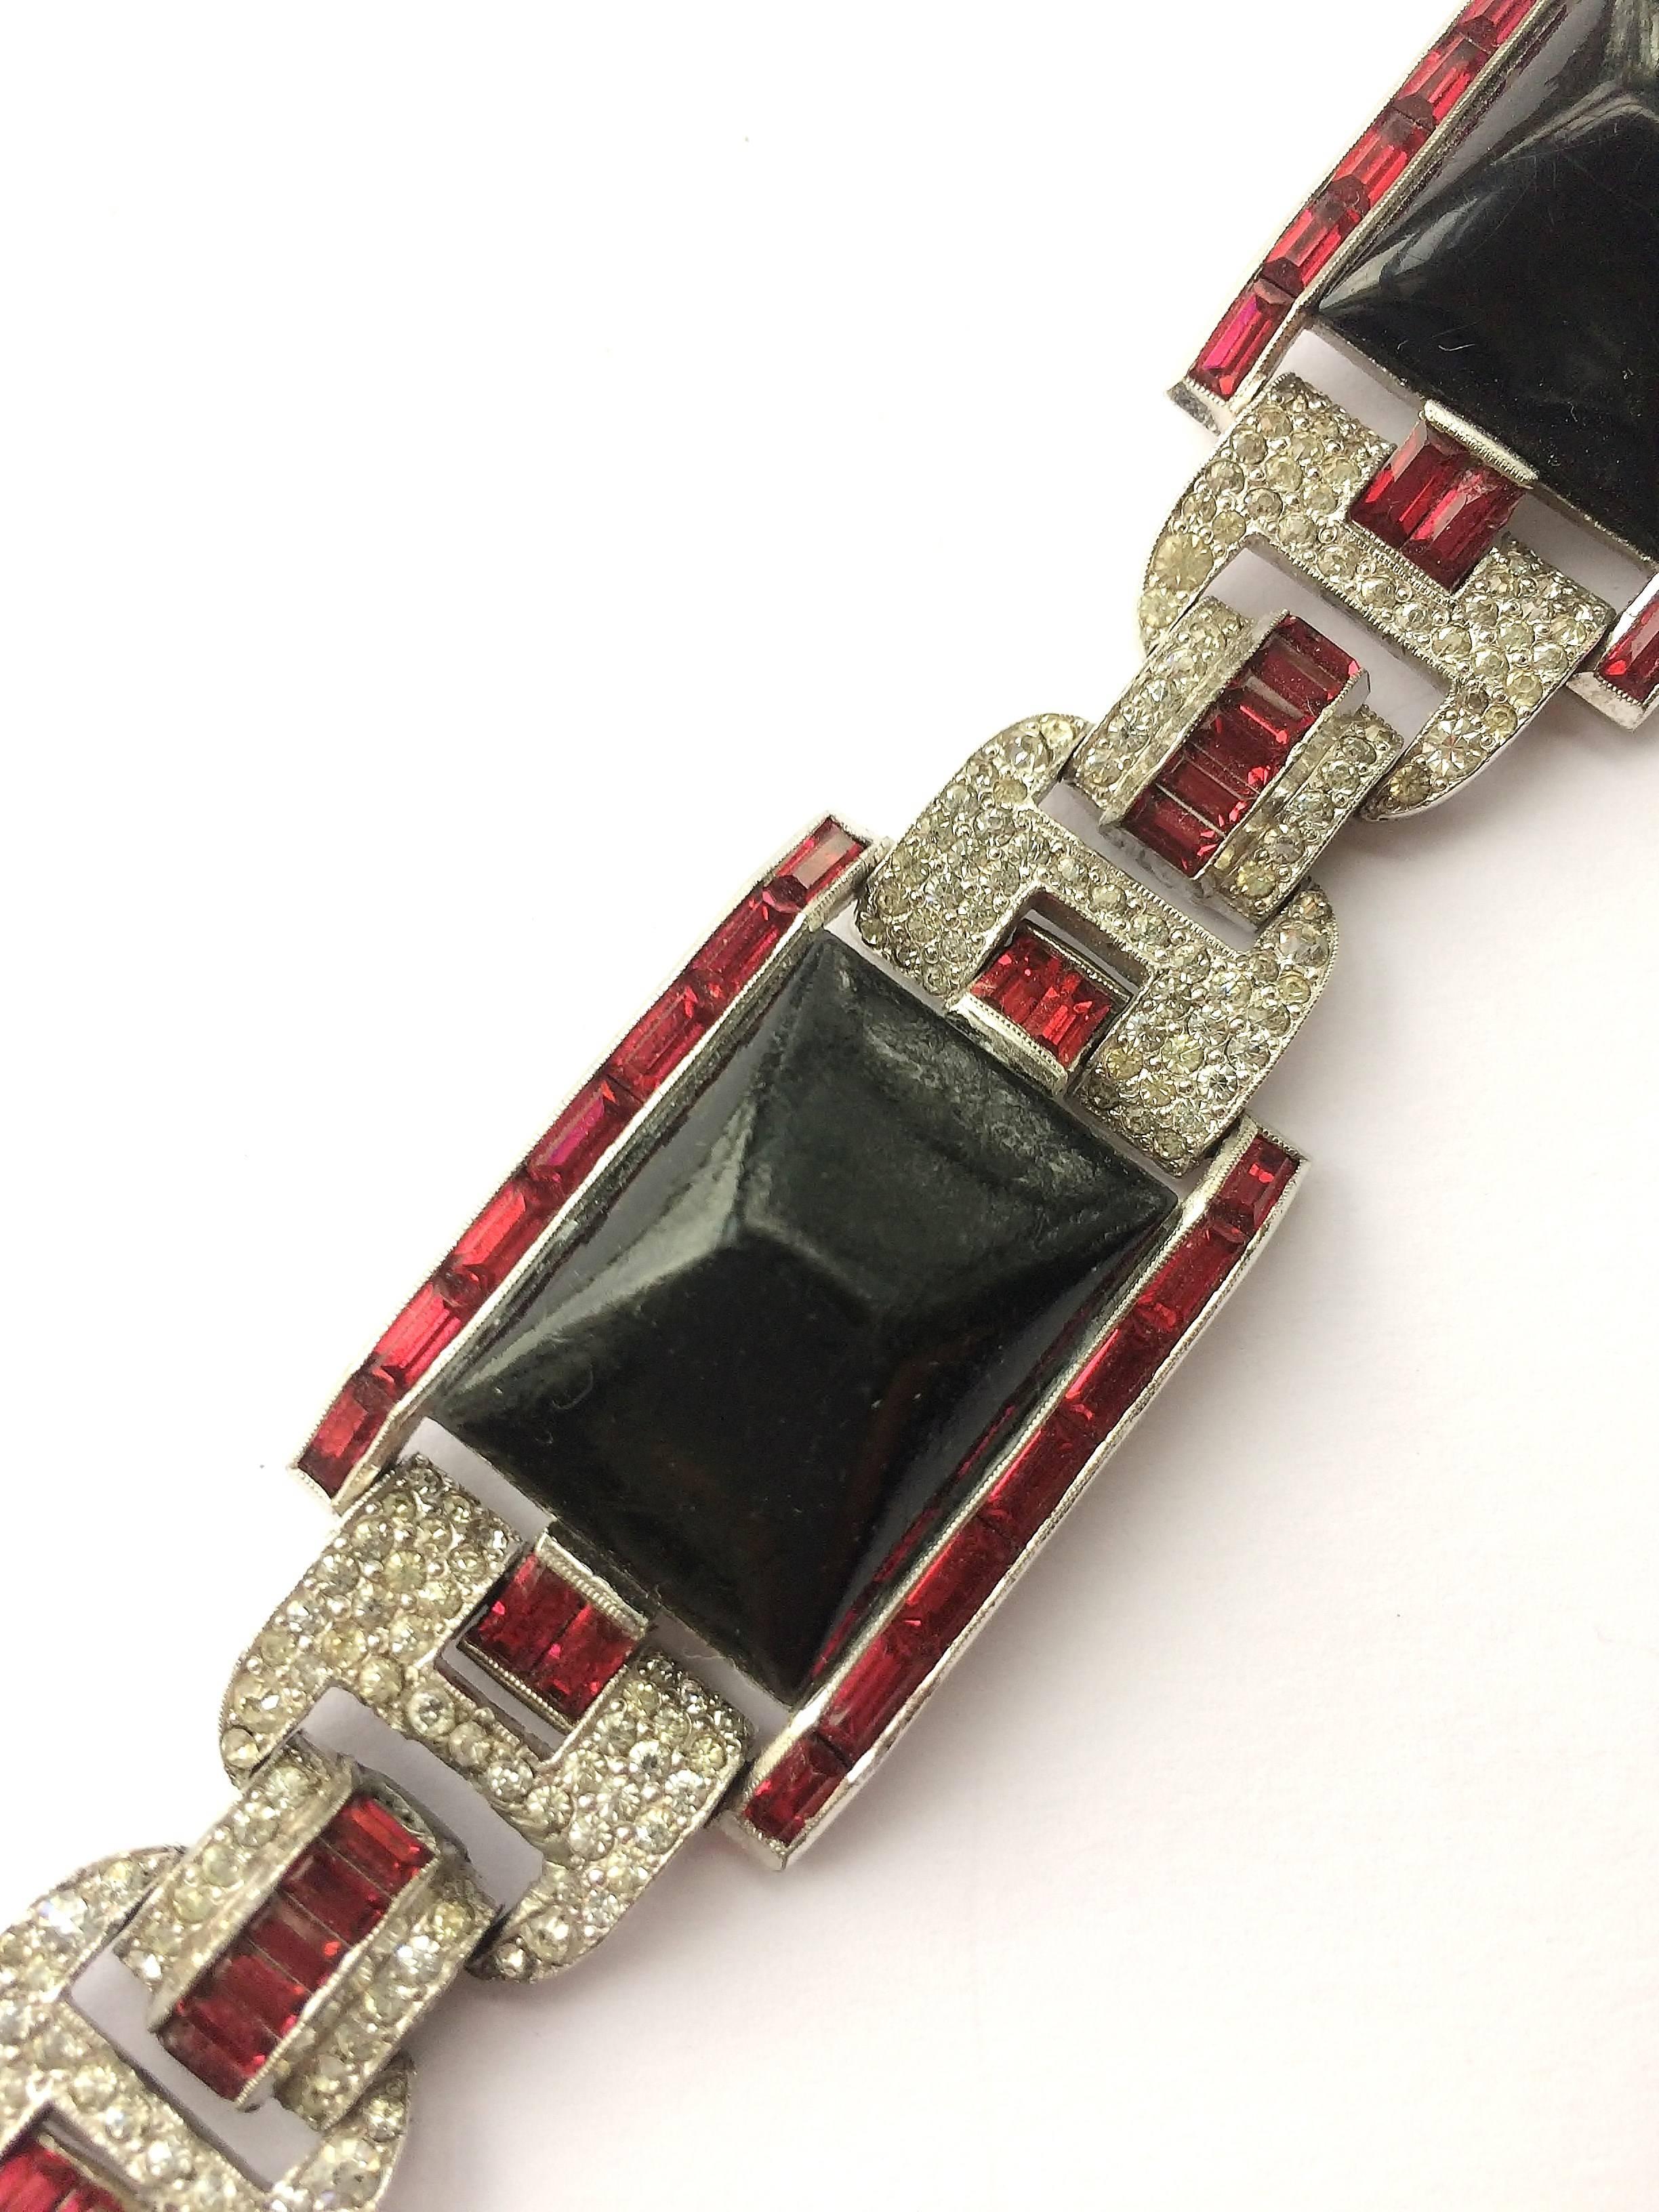 This wonderful bracelet by Trifari (marked KTF as shown) is high high Deco, a design never seen before in Trifari's designs.. Made from three enamelled pressed metal relief panels, and highlighted with ruby and clear pastes,all set in rhodium metal,